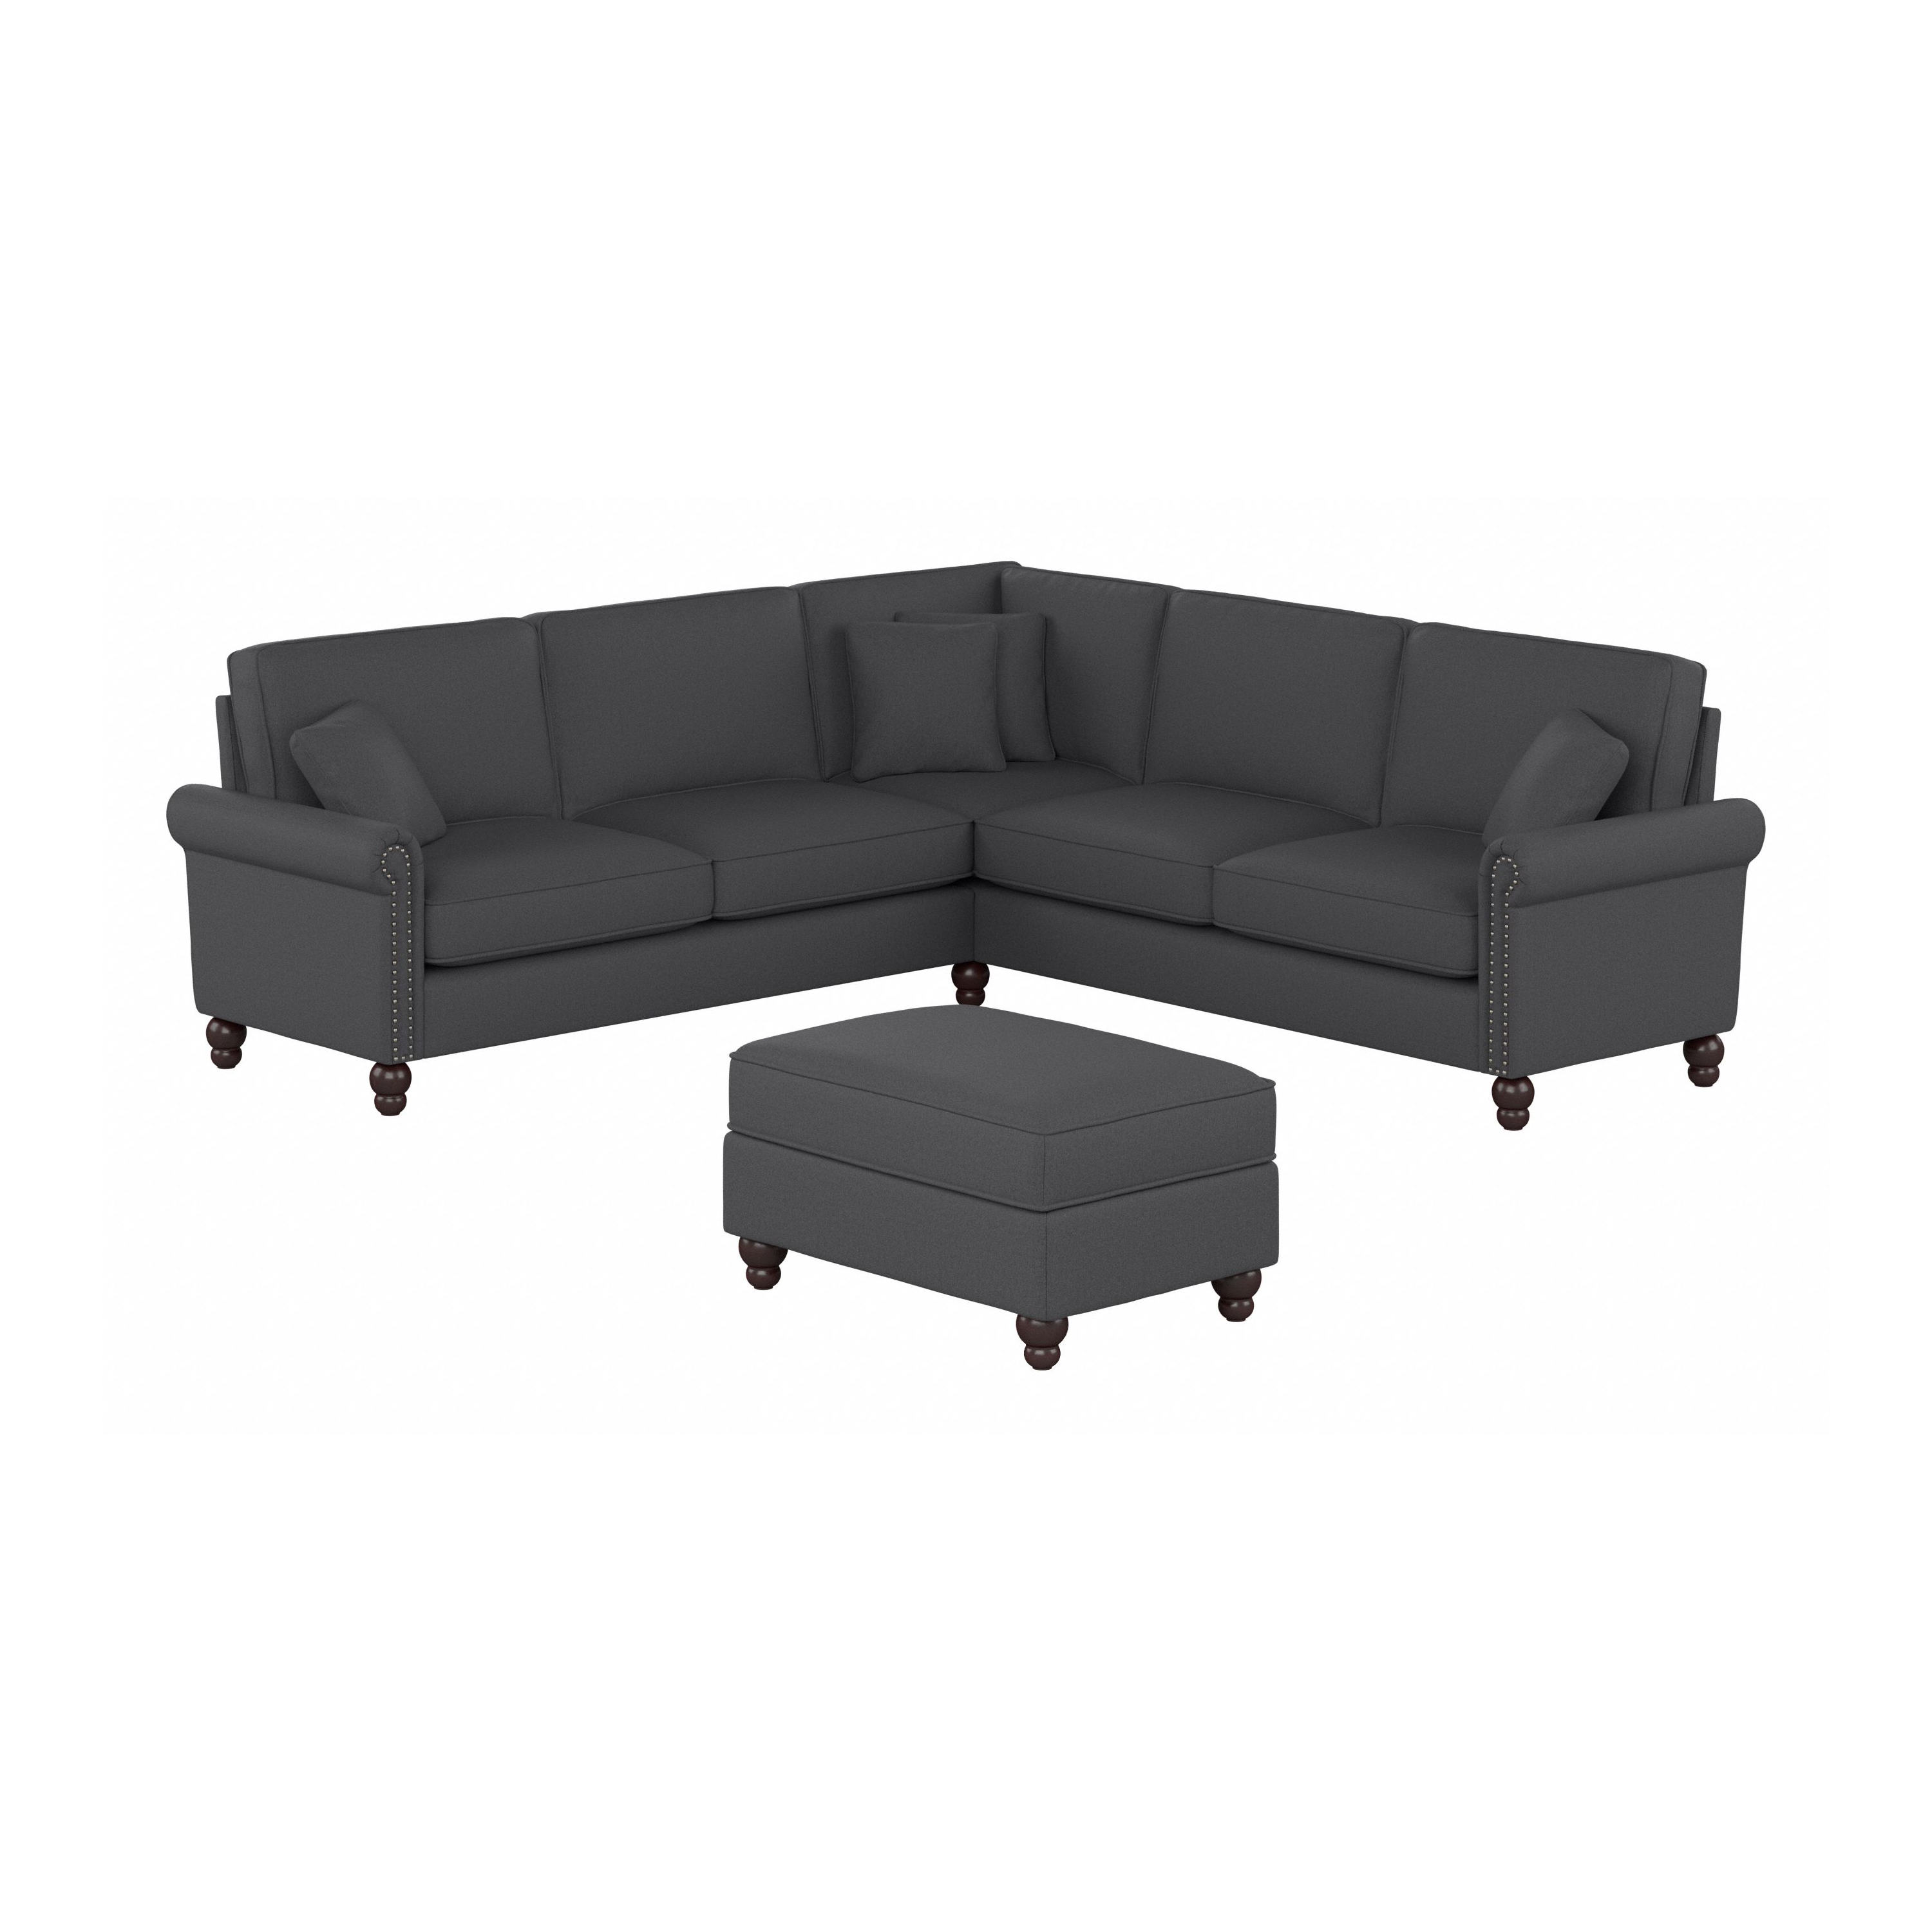 Shop Bush Furniture Coventry 99W L Shaped Sectional Couch with Ottoman 02 CVN003CGH #color_charcoal gray herringbone fabr